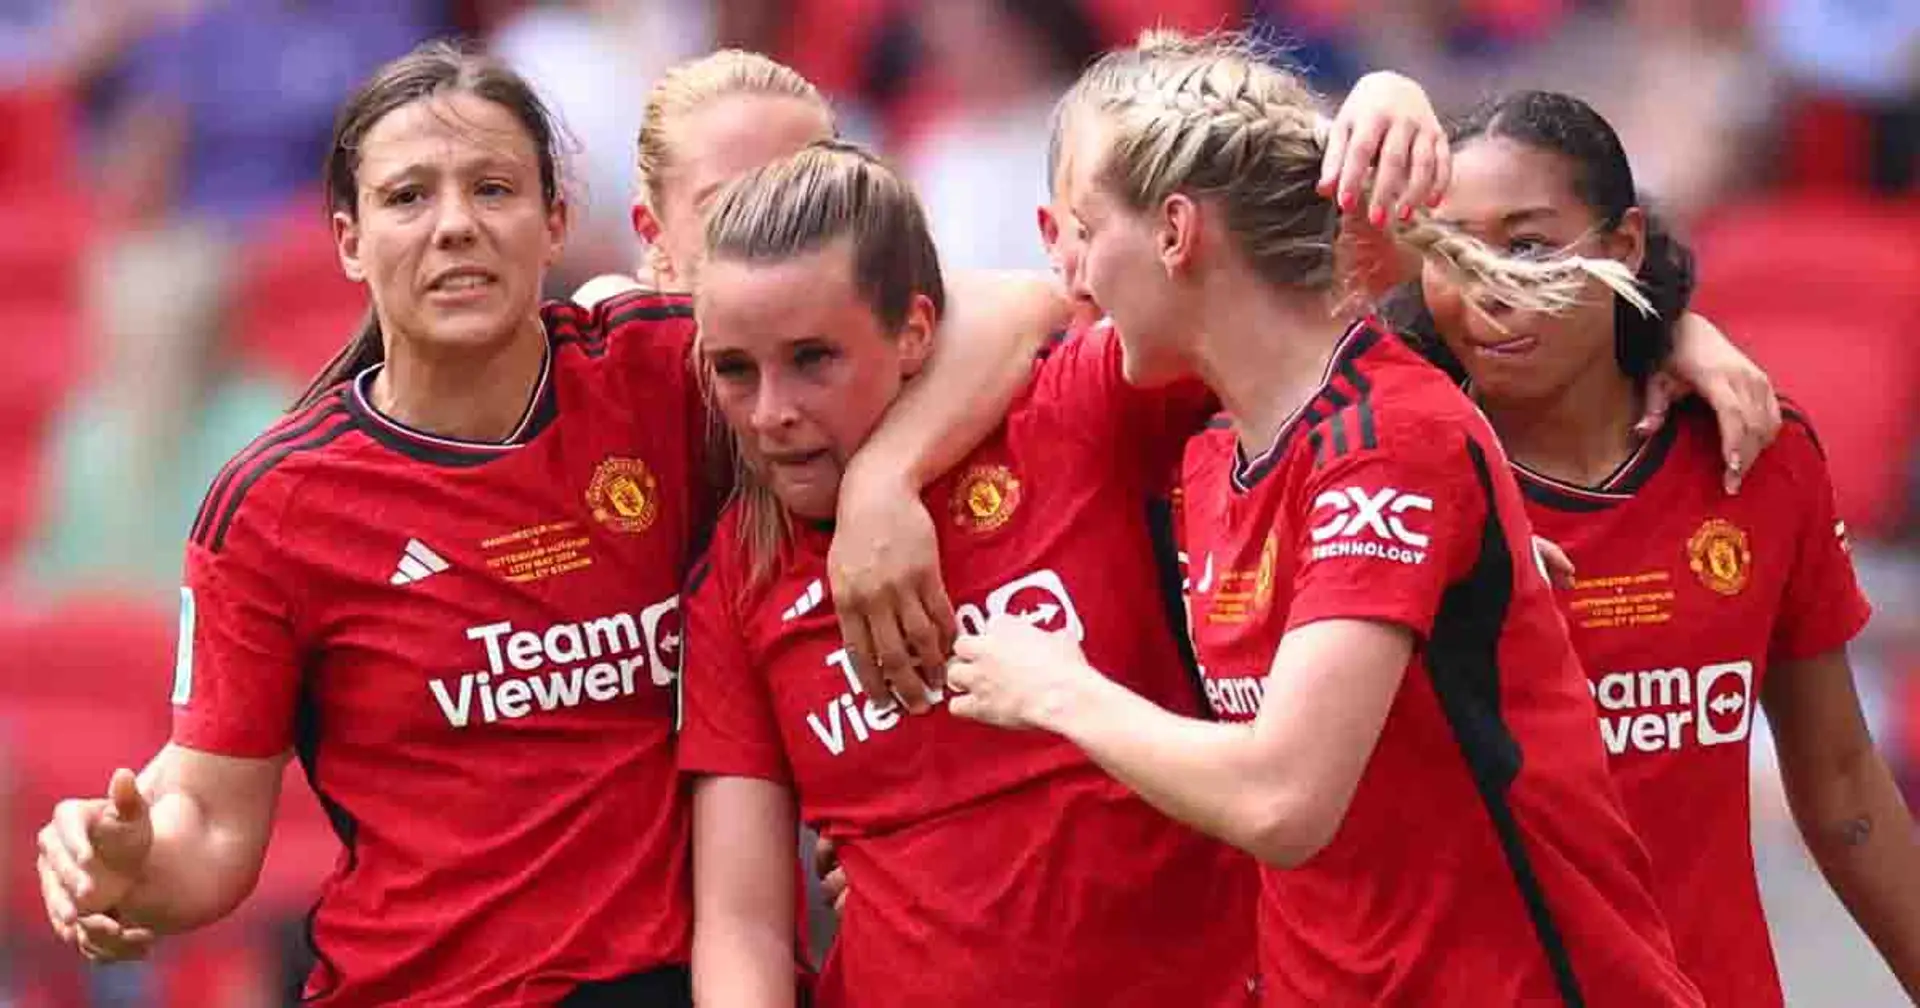 Man United win Women's FA Cup with crushing win over Spurs